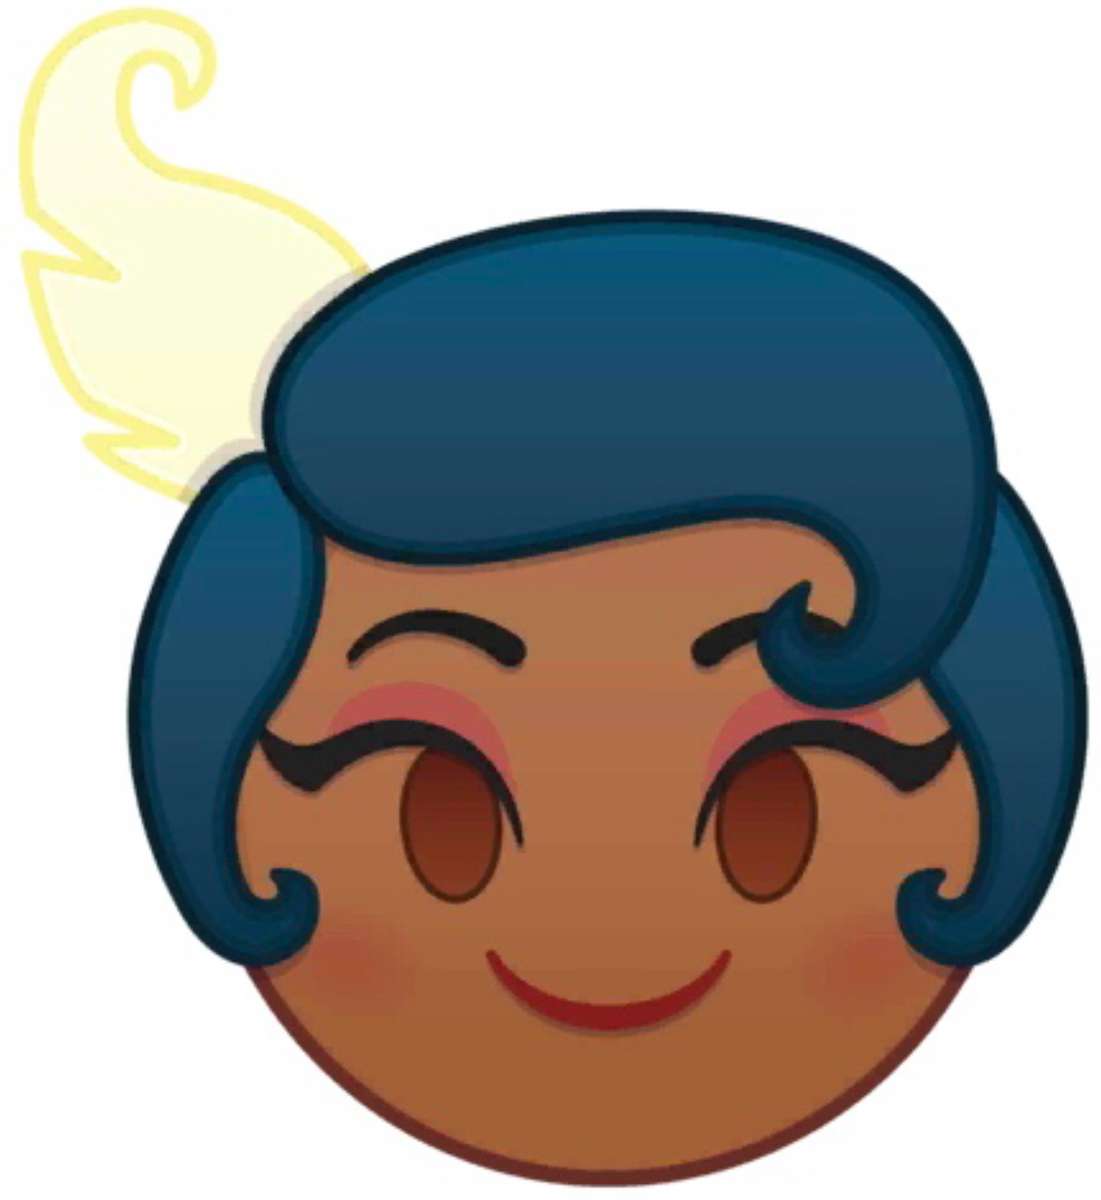 Emoji Almost There Tiana❤️❤️❤️❤️ pussel på nätet